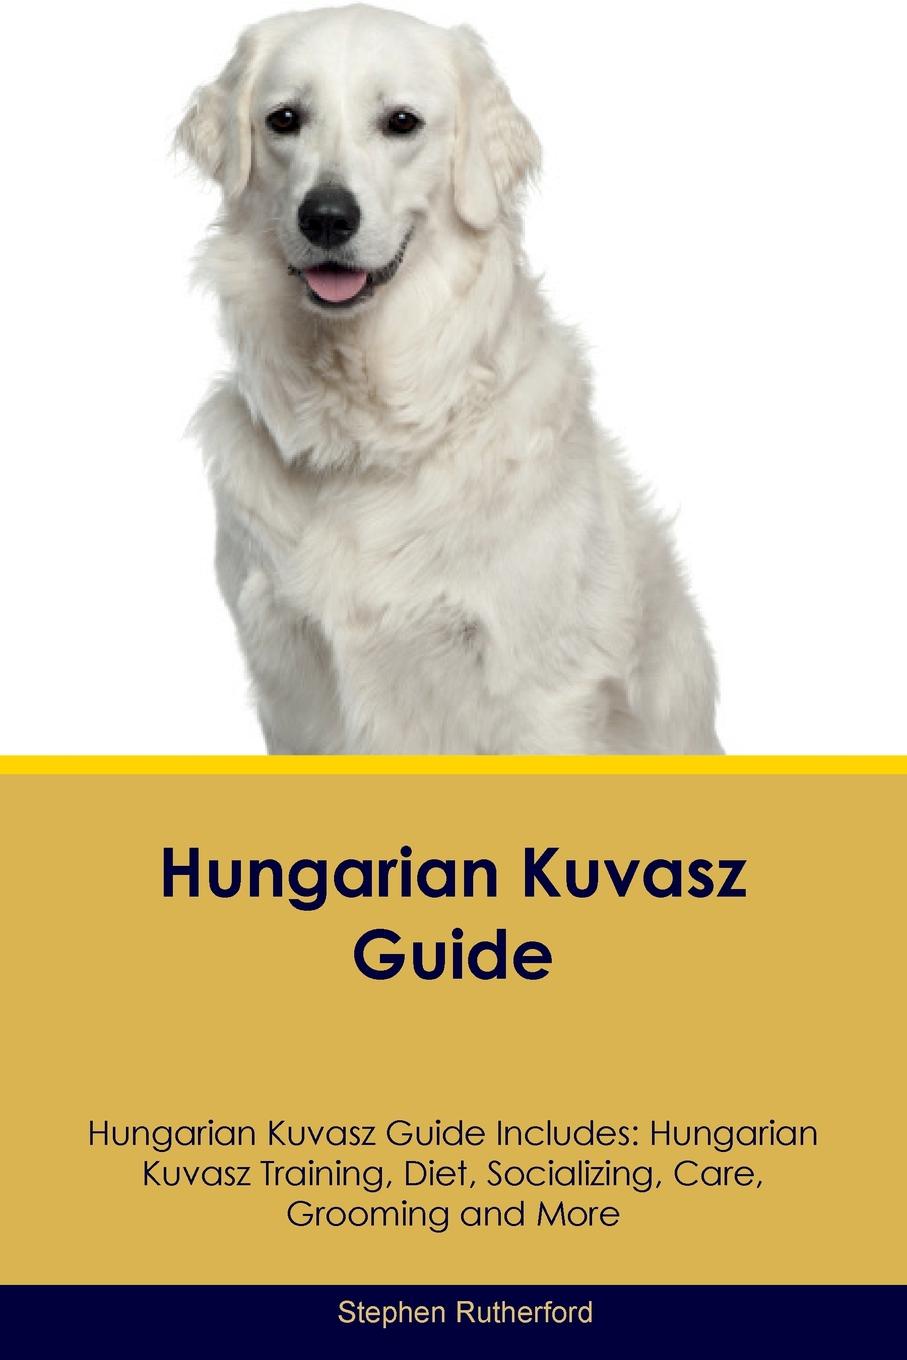 Hungarian Kuvasz Guide Hungarian Kuvasz Guide Includes. Hungarian Kuvasz Training, Diet, Socializing, Care, Grooming, Breeding and More